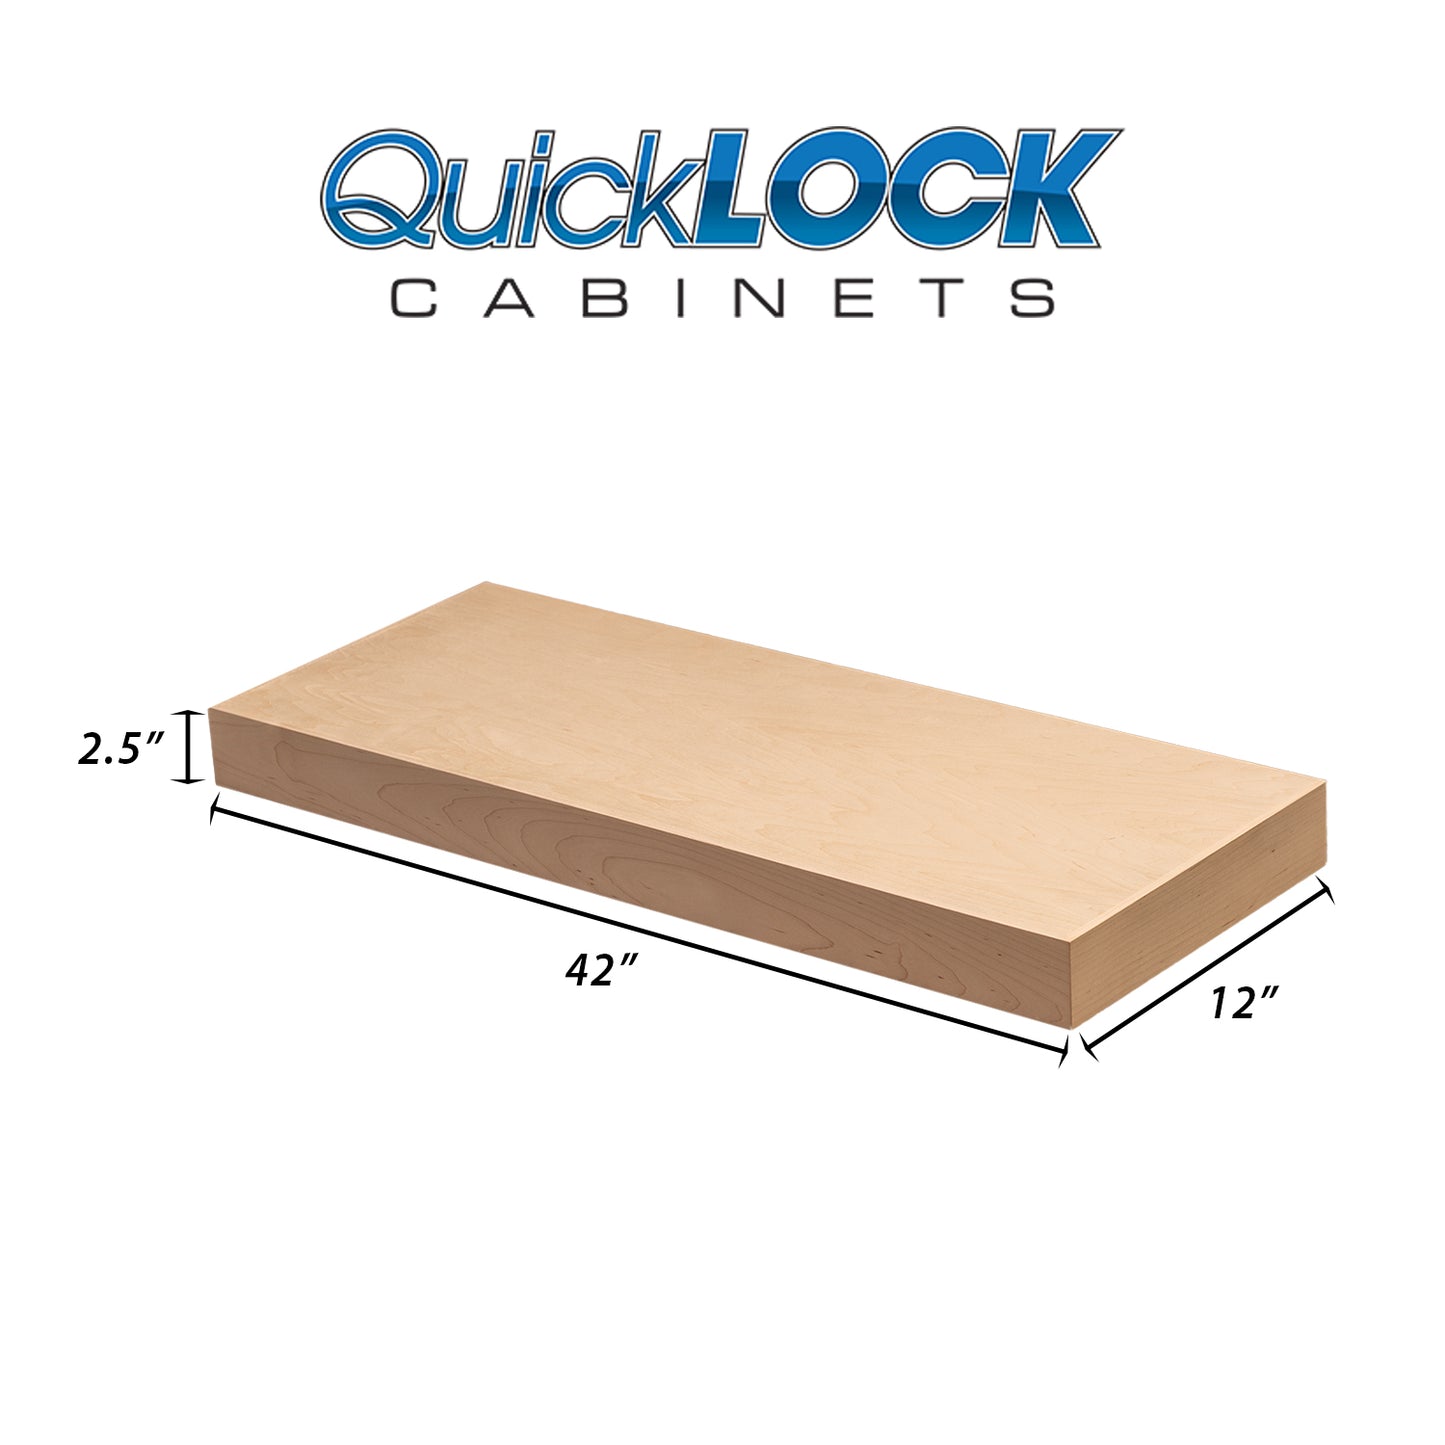 Quicklock Cabinets Floating Shelves | 2.5" Thick | Raw Maple, 12" D x 42" W x 2.5" H | American Made | Hardwood Bracket | Complete Shelf Unit